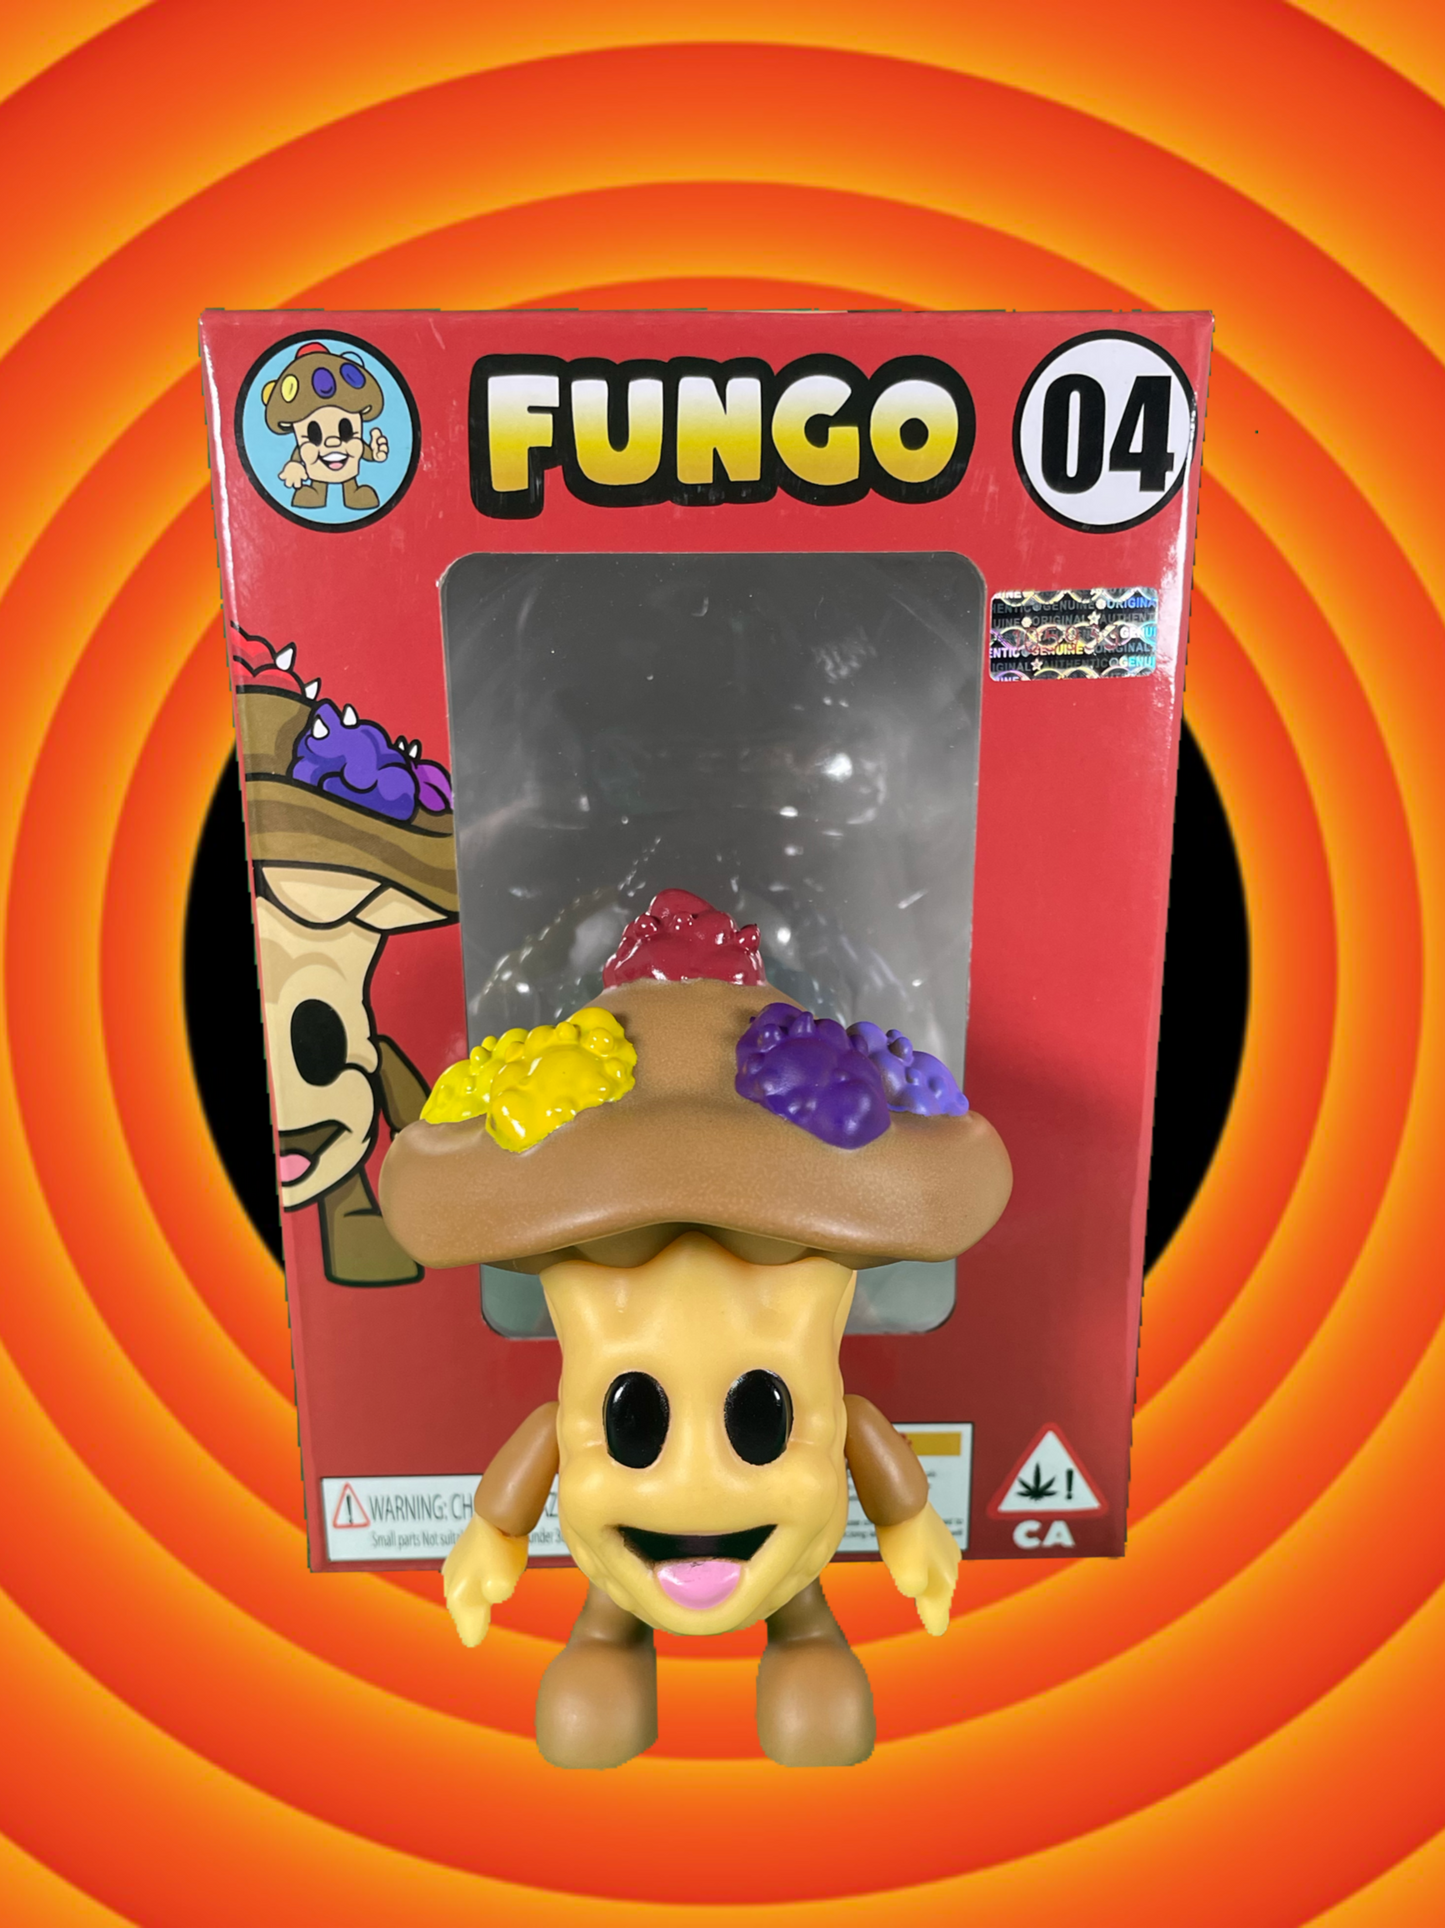 Fungo Limited Edition Collectible 1 of 500, 4-inch hand-painted figures, with first edition collectible box